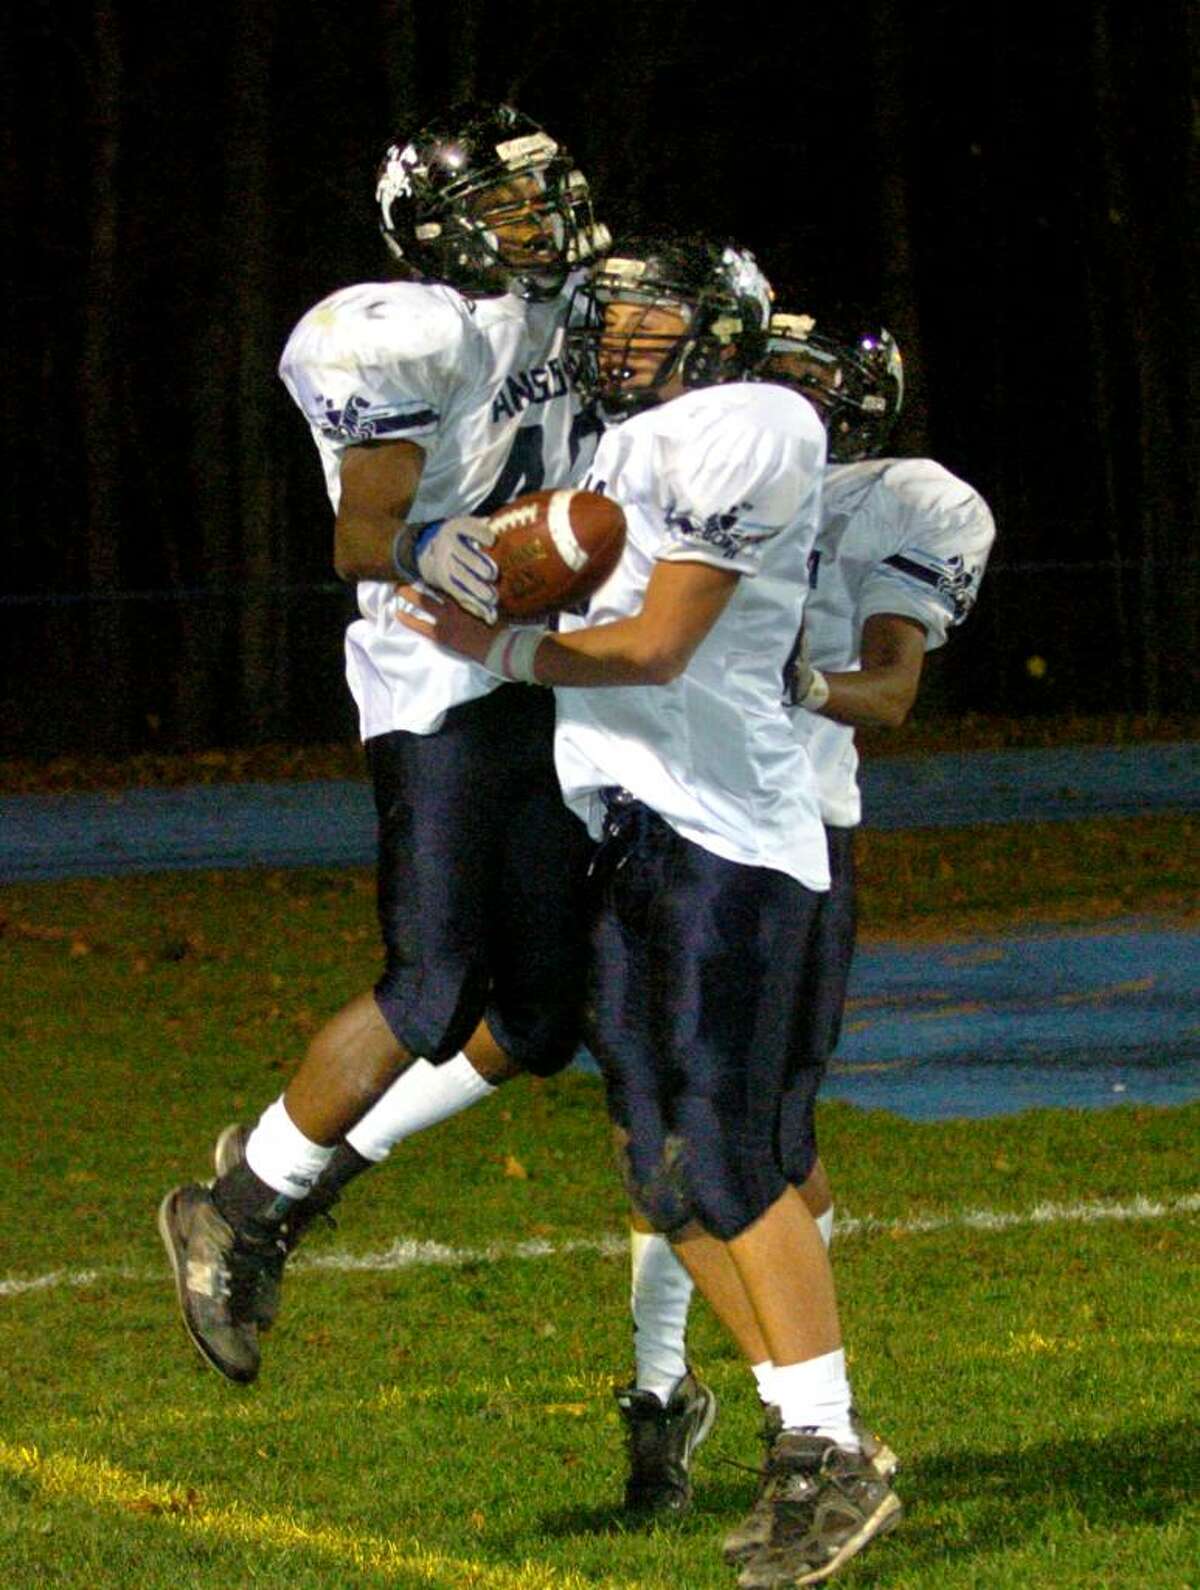 Christian Abraham/Staff photographer Ansonia's #40 Robert Kinnebrew, left, leaps into teammate #82 Jake LaRovera's arms after a touchdown, during football action against Seymour in Seymour, Conn. on Thursday Nov. 12, 2009. Ansonia defeated Seymour 51-21.